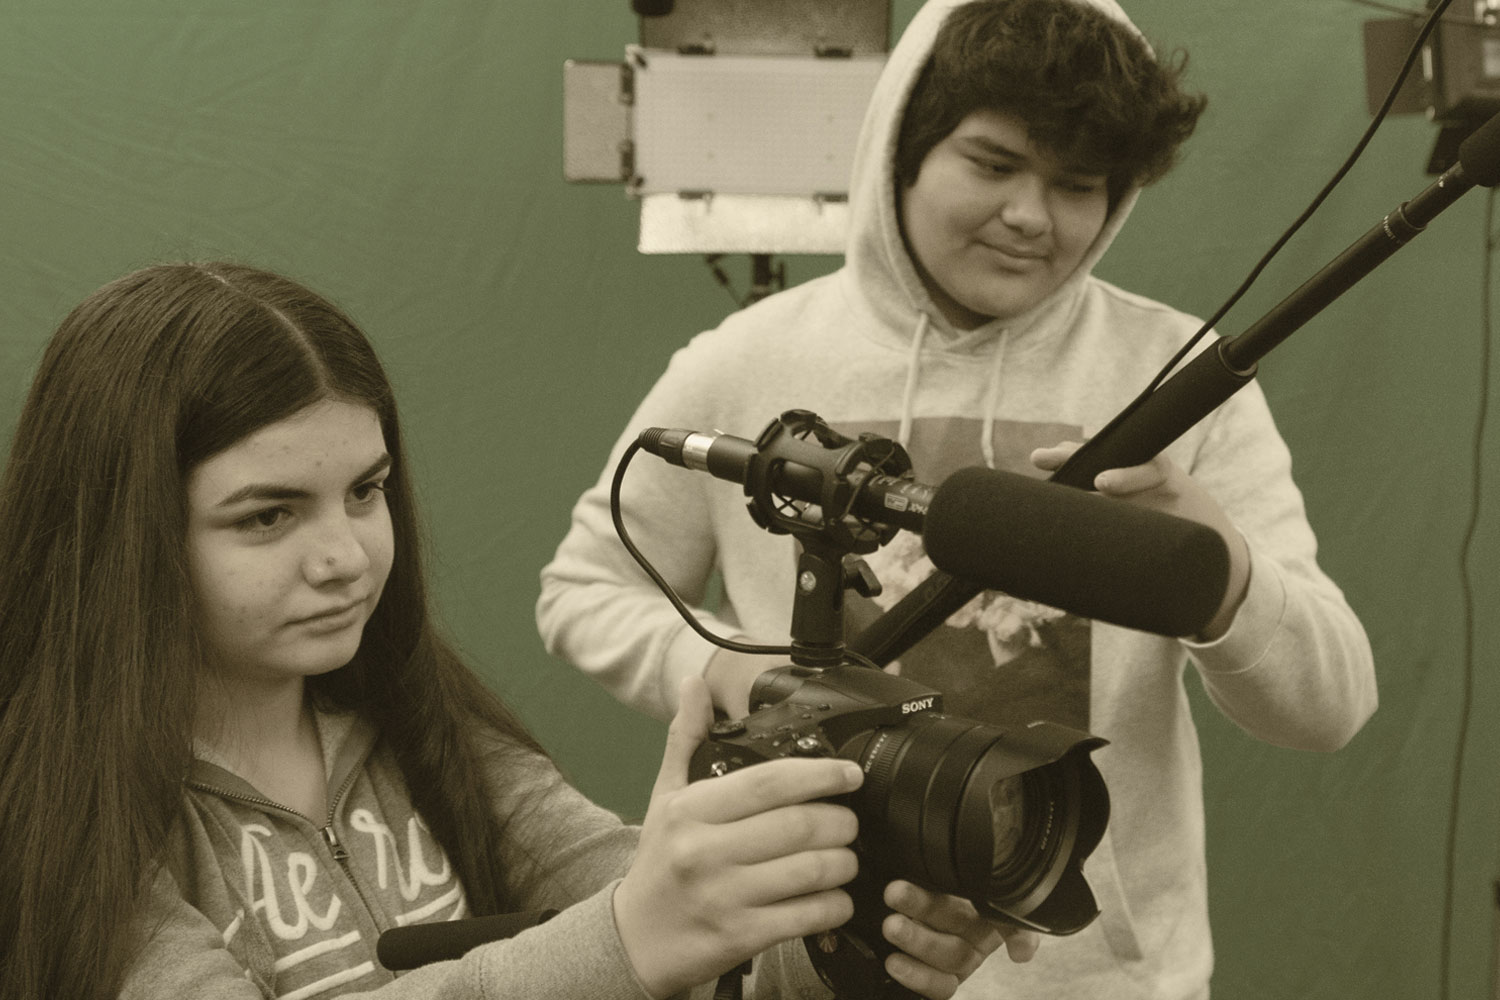 Two students operating film equipment